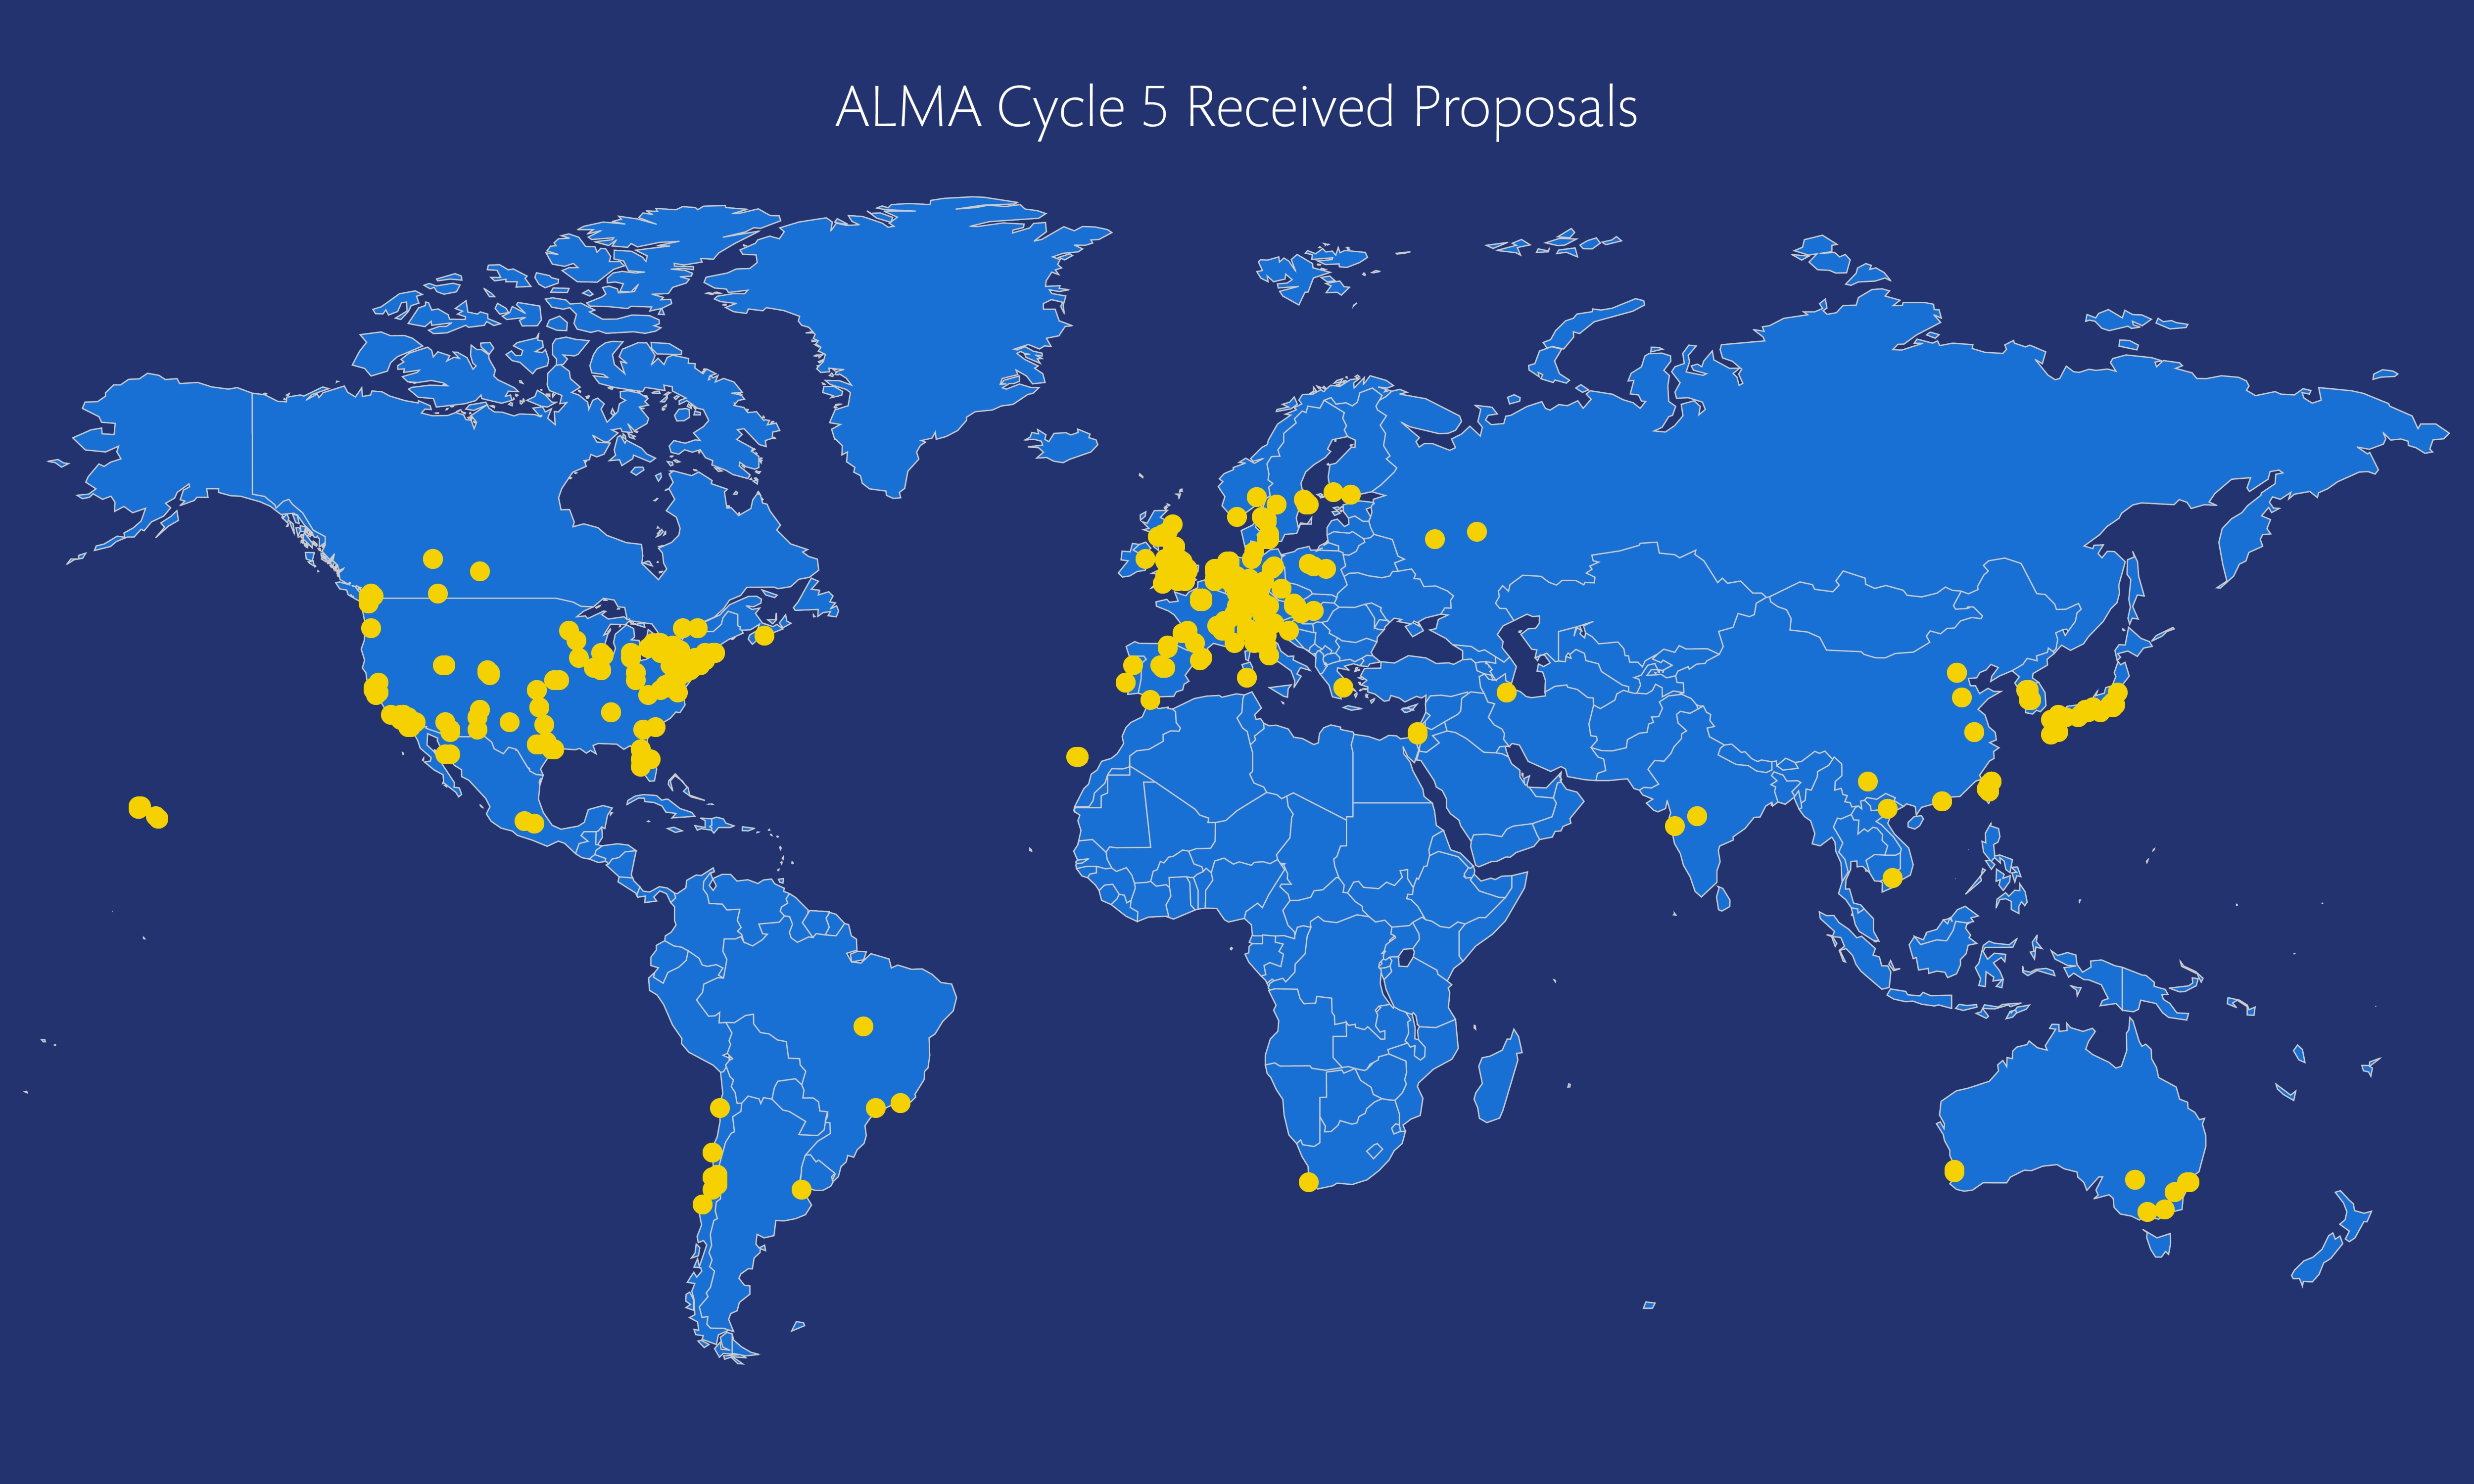 Geographycal distribution of Cycle 5 proposals